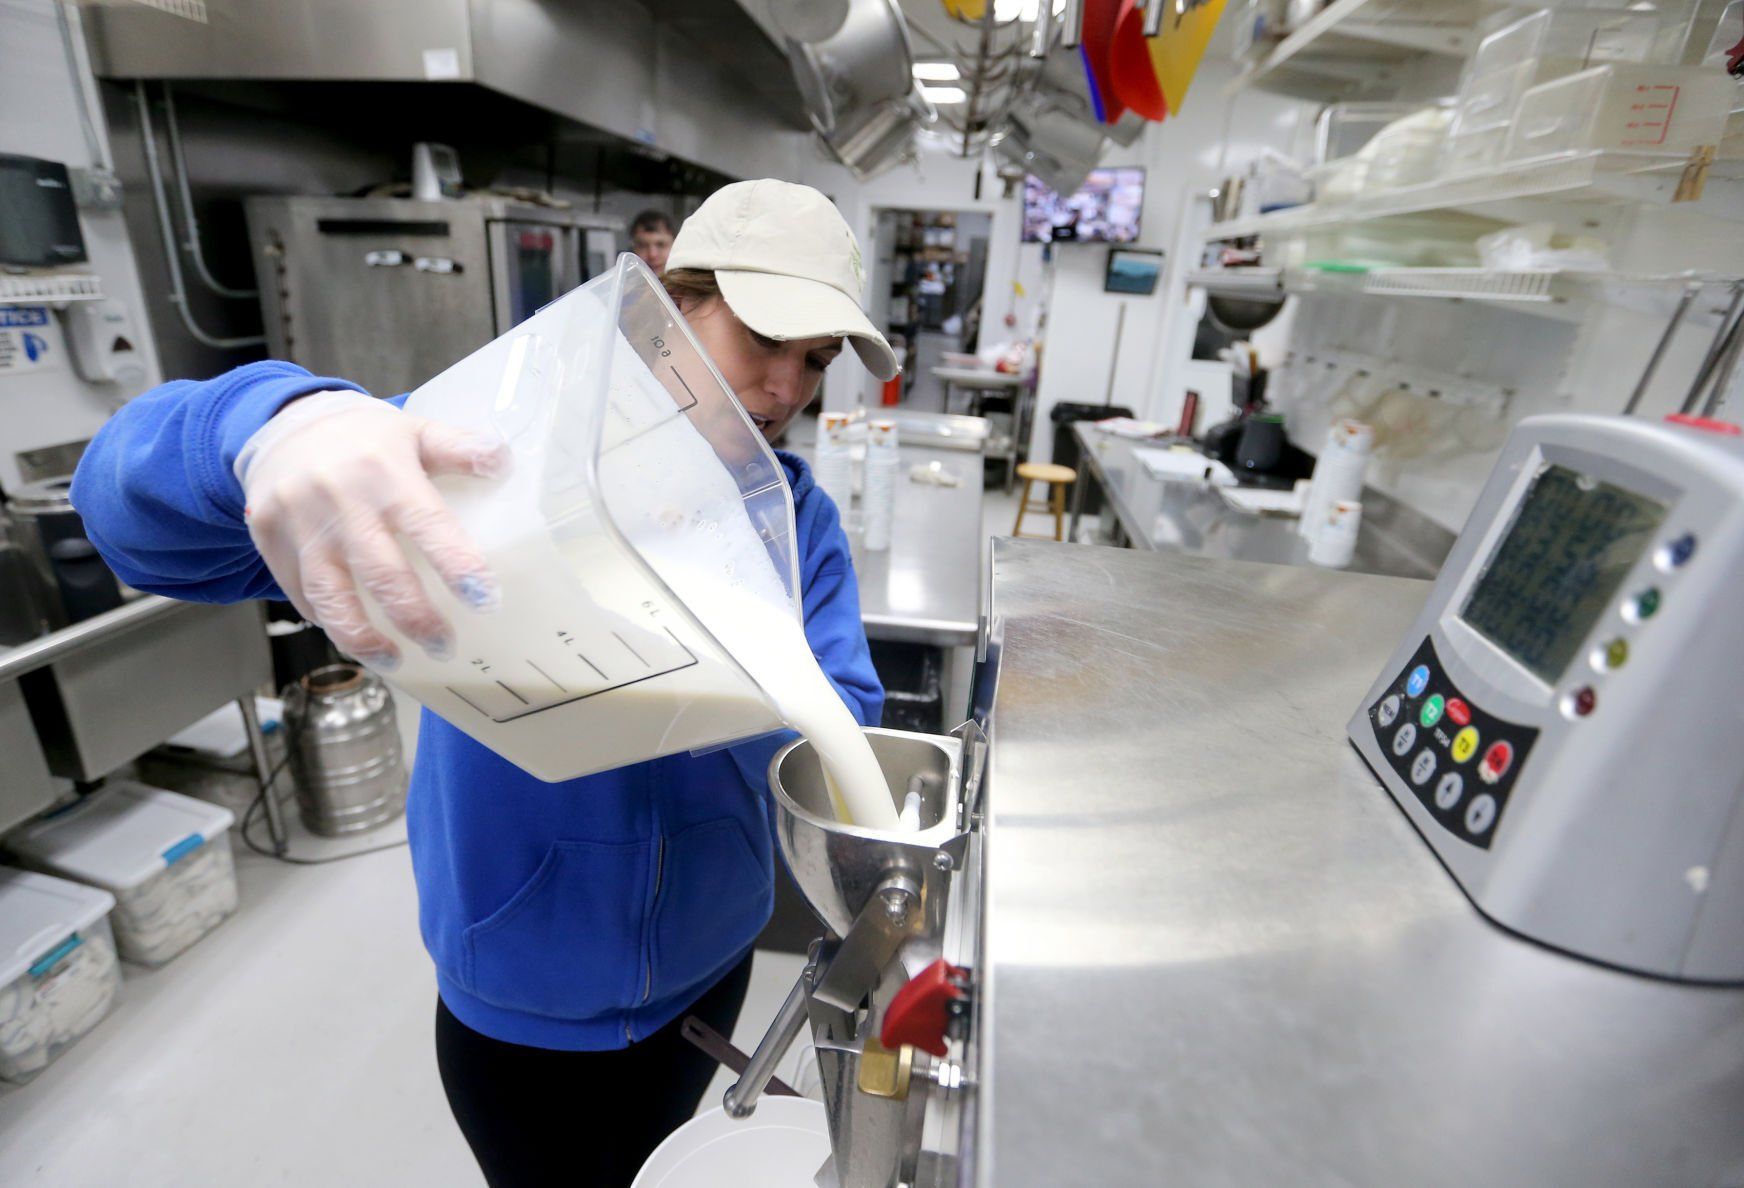 Whitney Beyer makes ice cream at Vesperman Farms in Lancaster, Wis., on Monday.    PHOTO CREDIT: JESSICA REILLY